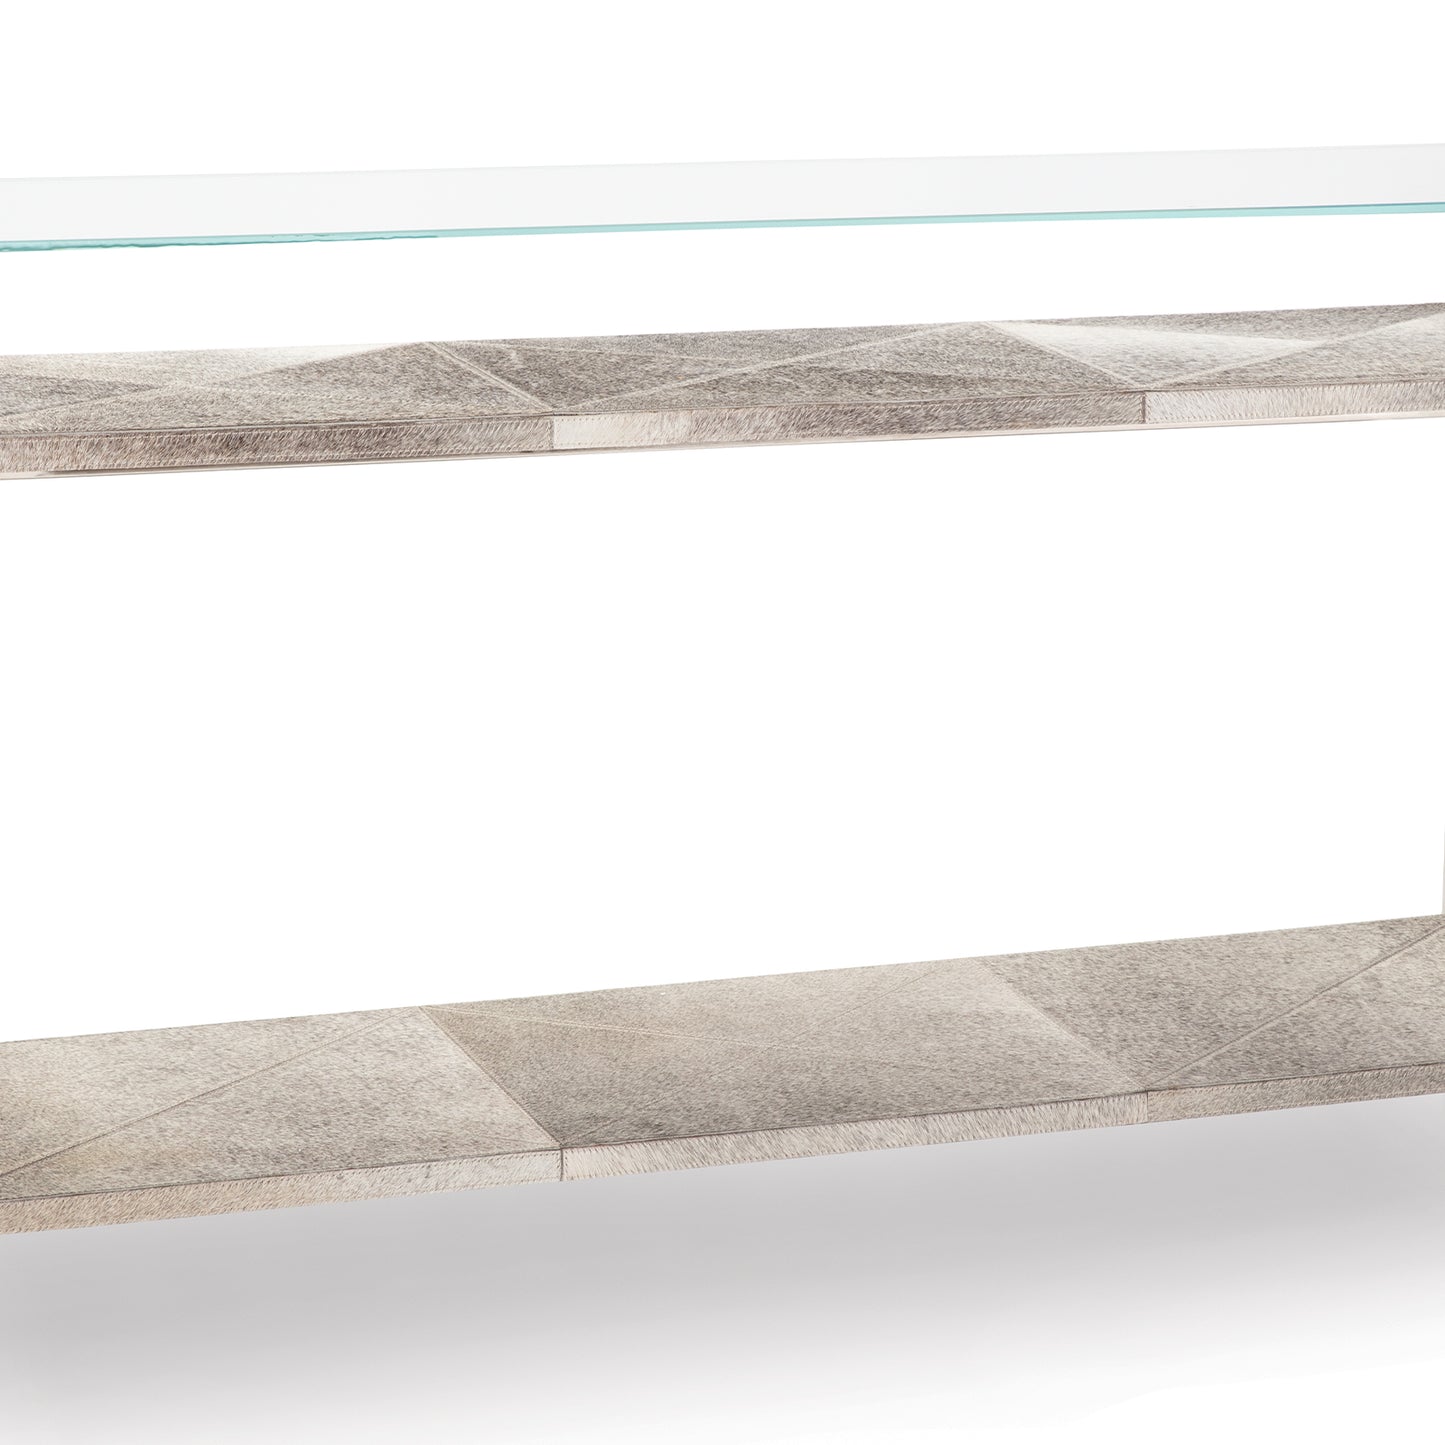 Andres Hair on Hide Console Large in Polished Nickel by Regina Andrew